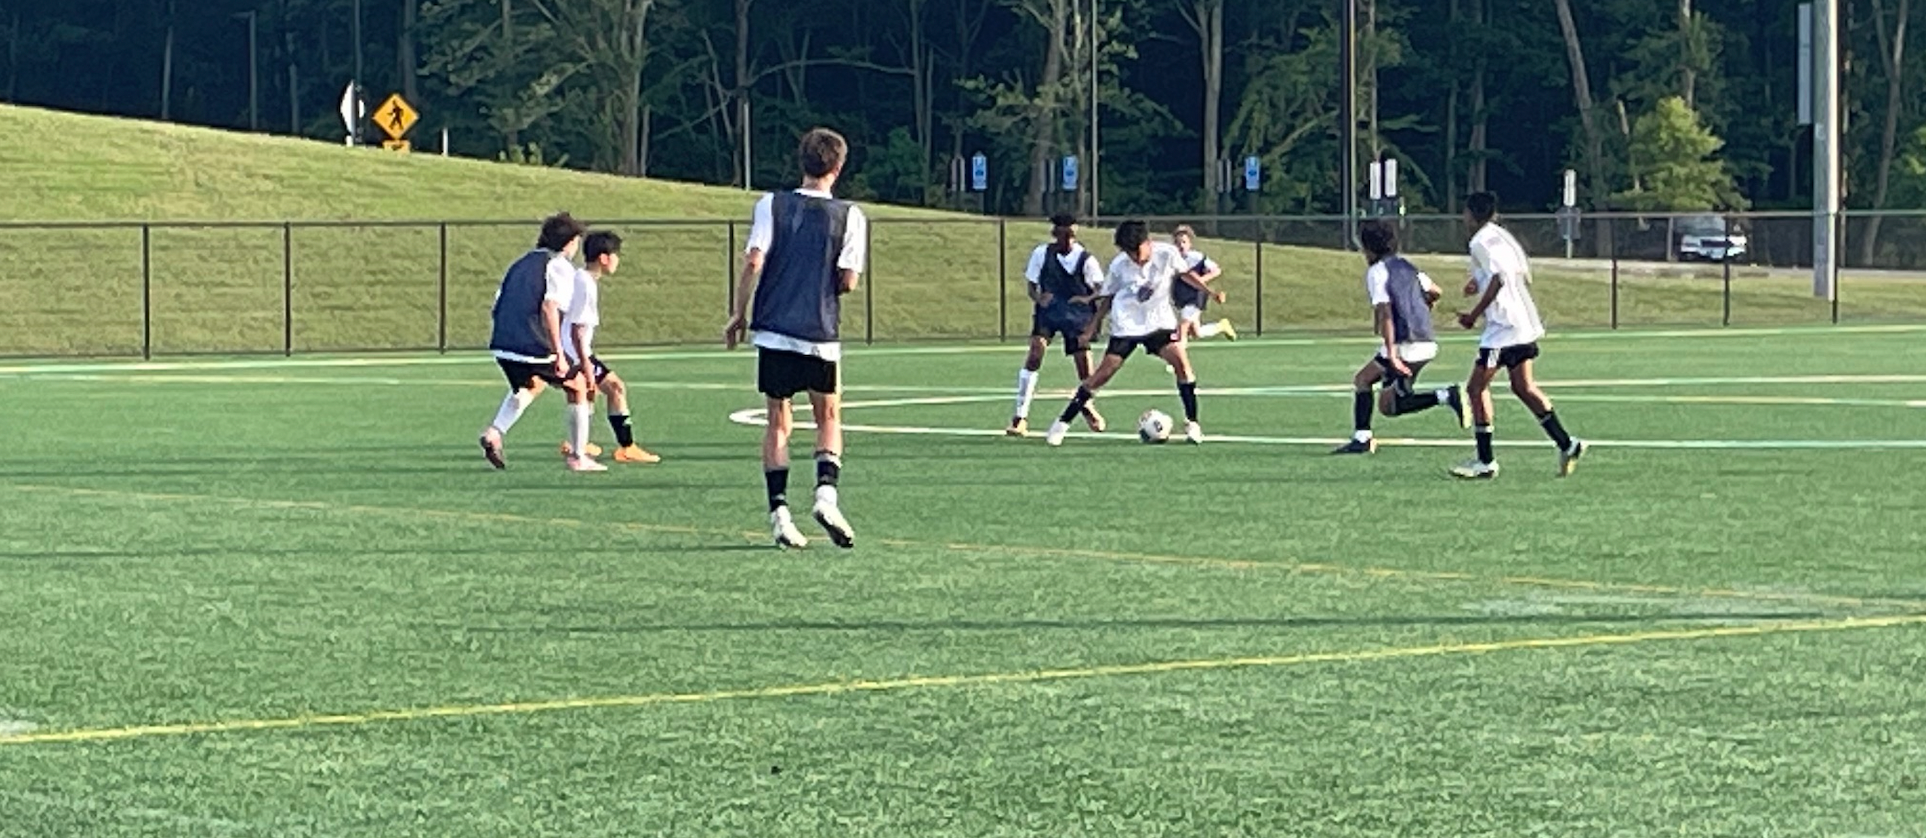 Chris Gbandi Soccer Academy Residential Camp || at UCONN  event image